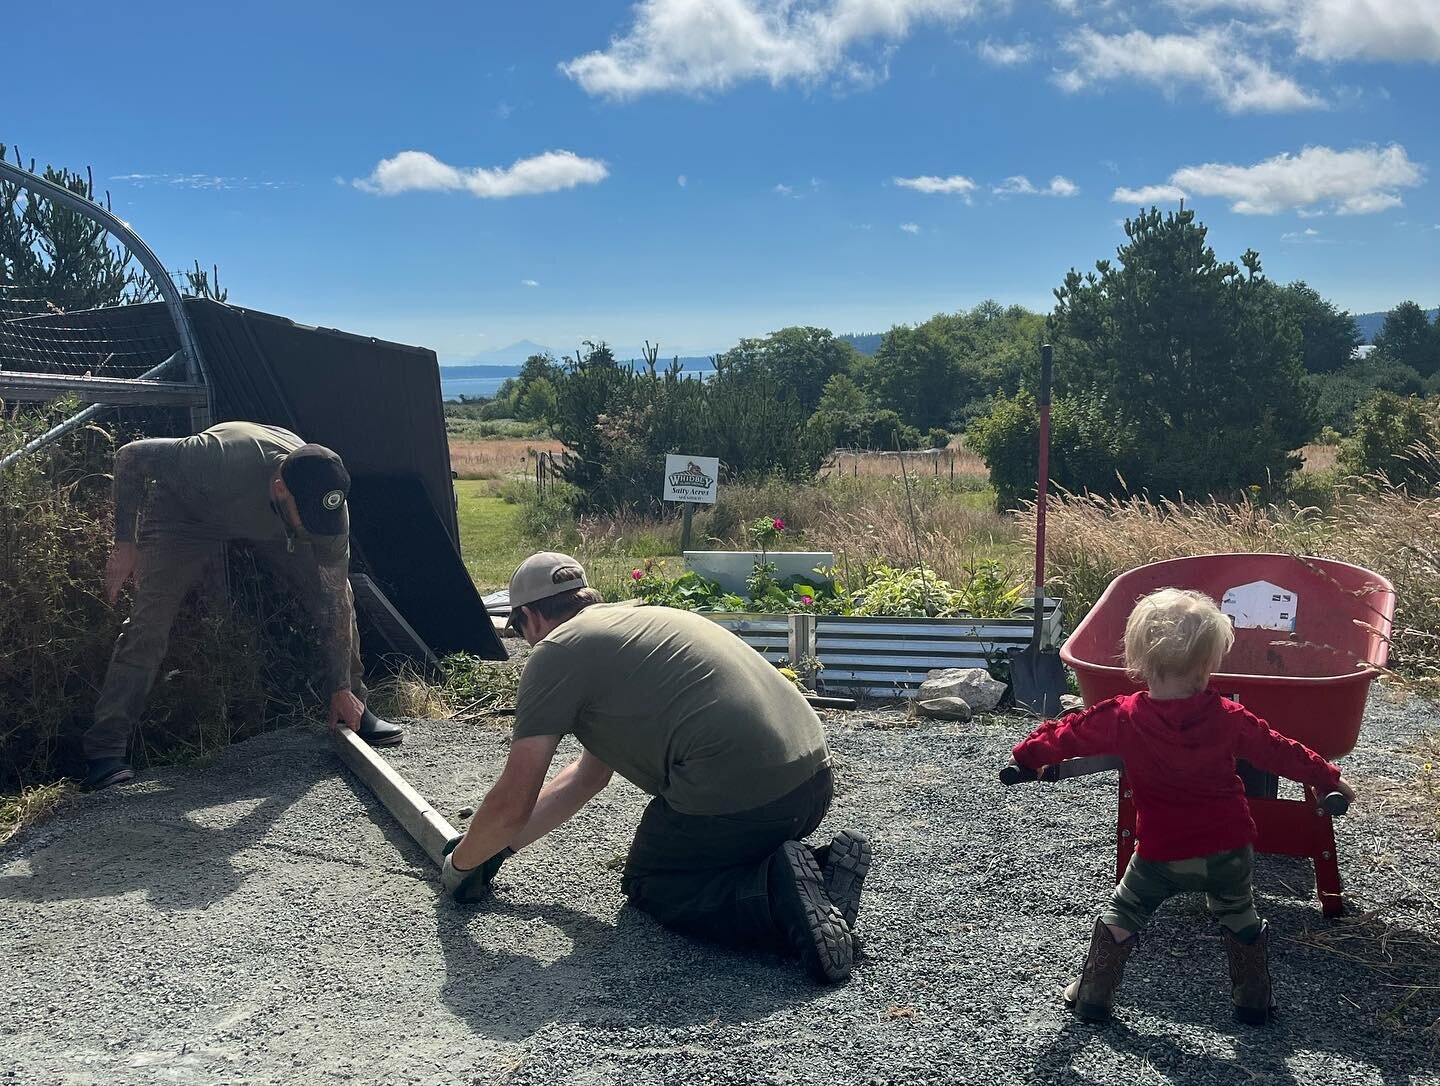 Being a small nonprofit, our team members wear a lot of different hats. And here&rsquo;s a prime example! We have Sean, Executive Director, and Angela, Operations Director, out at our Whidbey farm putting in the work to get a new shed built. But none